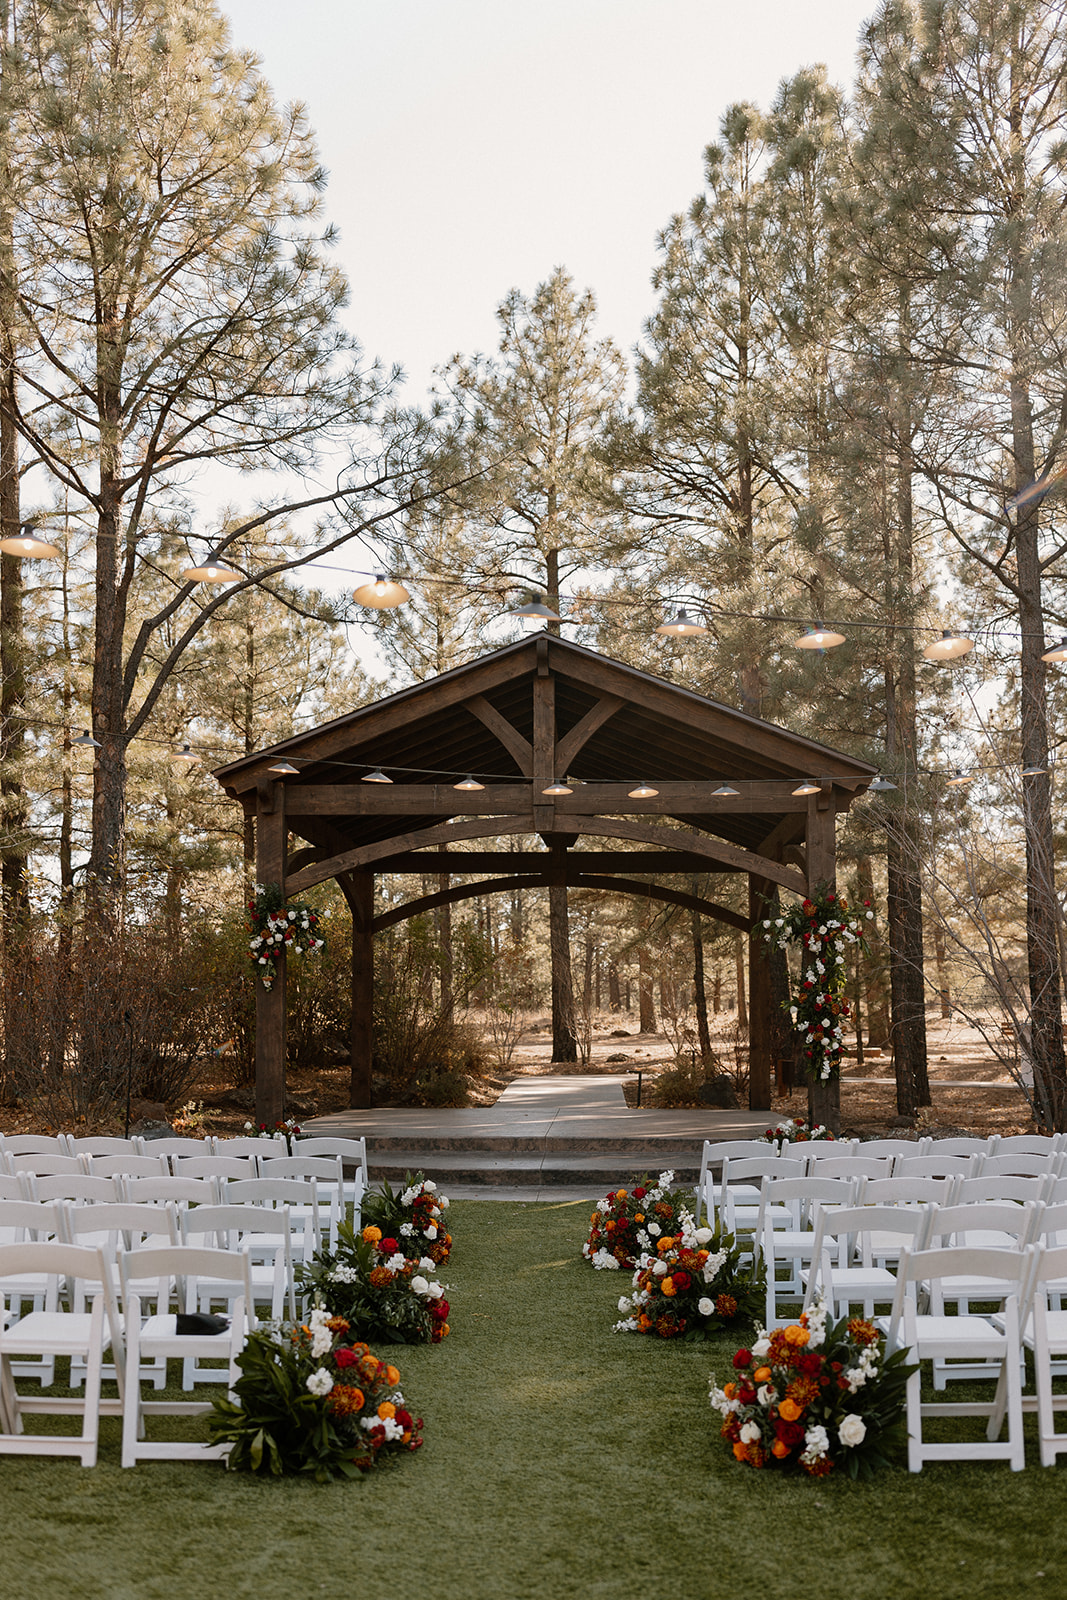 Gorgeous Arizona wedding venue prepped and ready for the big wedding day!